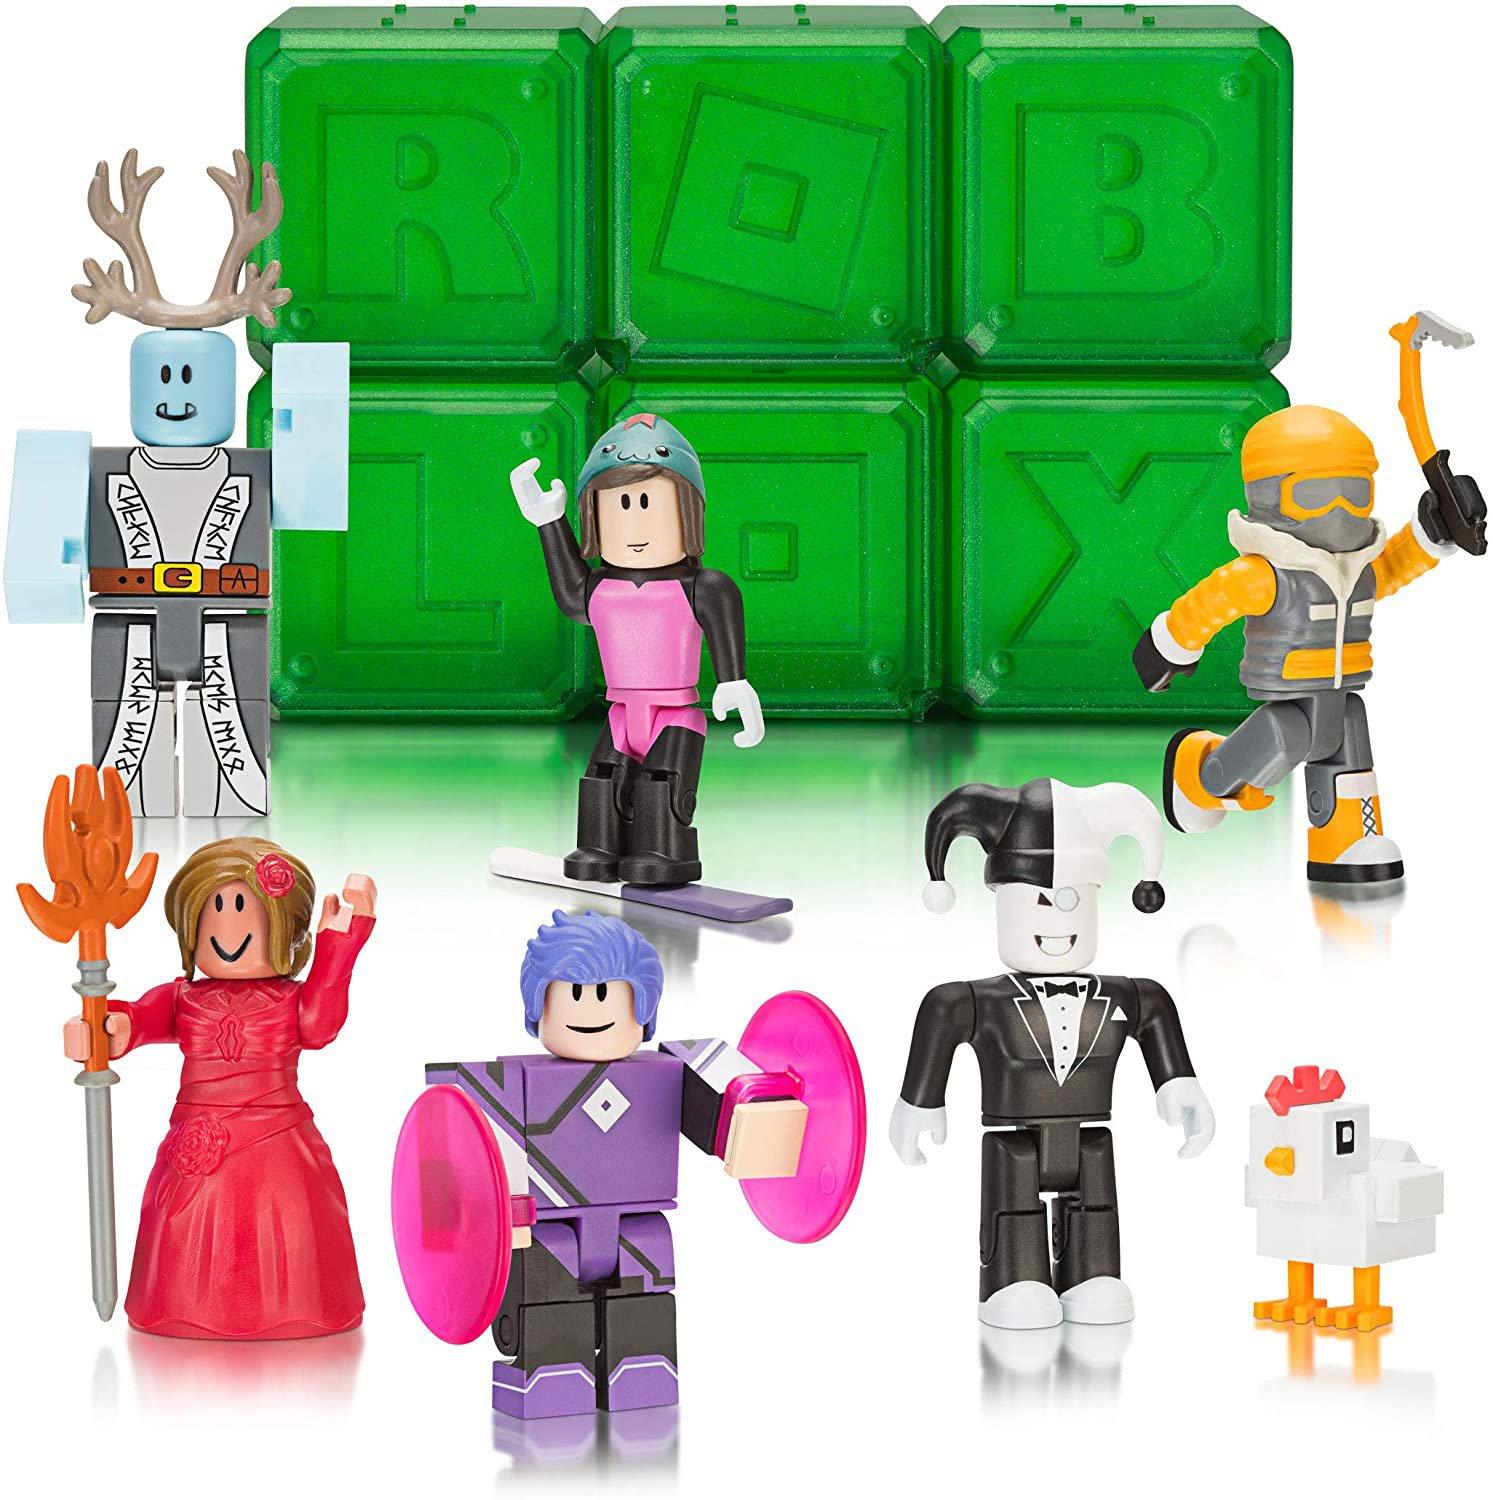 Roblox Action Collection Series 4 Mystery Figure Includes 1 Figure And Exclusive Virtual Item Gamestop - does gamestop have roblox figures